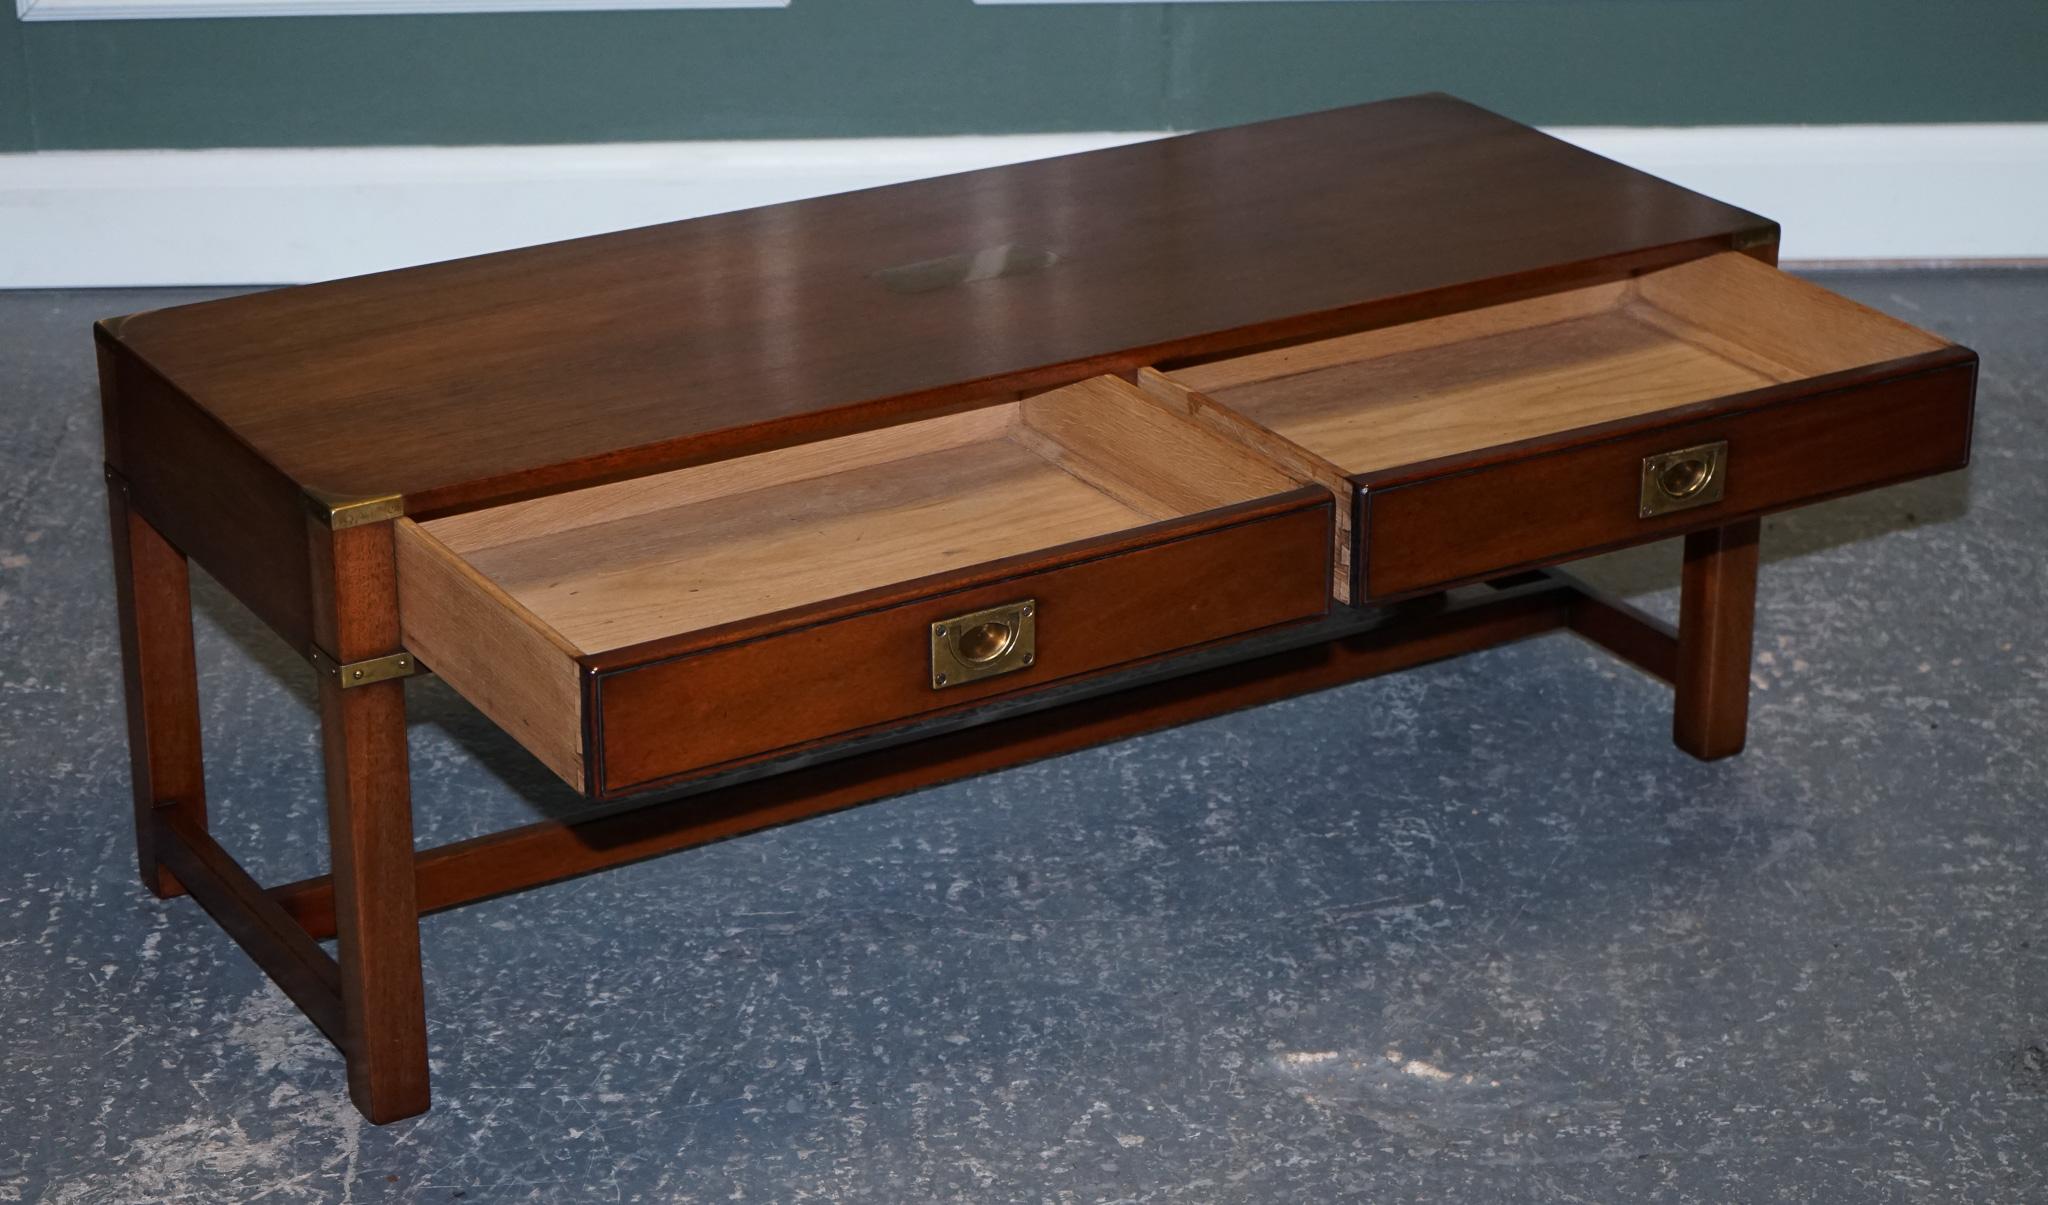 British Kennedy for Harrods London Military Campaign Coffee Table with 2 Drawers